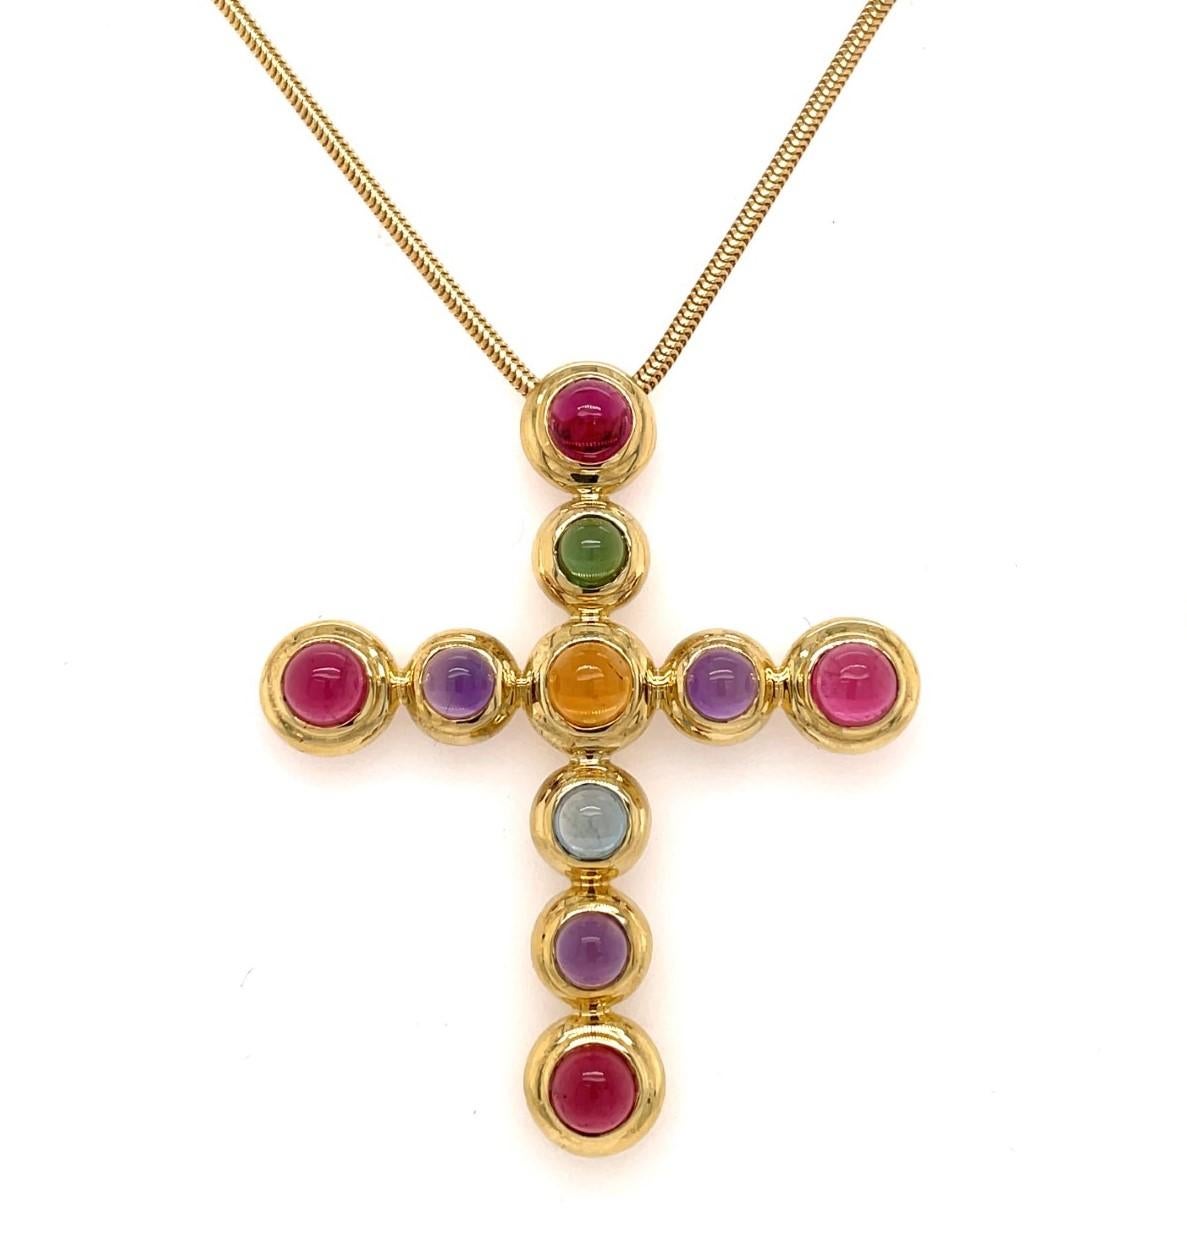 Tiffany & Co Paloma Picasso Gemstone Cross Necklace
 18K Yellow Gold 
Aquamarine, topaz, amethyst, tourmalines. 
Approx. 78 mm long and 62 mm wide. 
18KY Gold 18'' Tiffany Chain
Comes with Original Tiffany & Co Necklace Folder